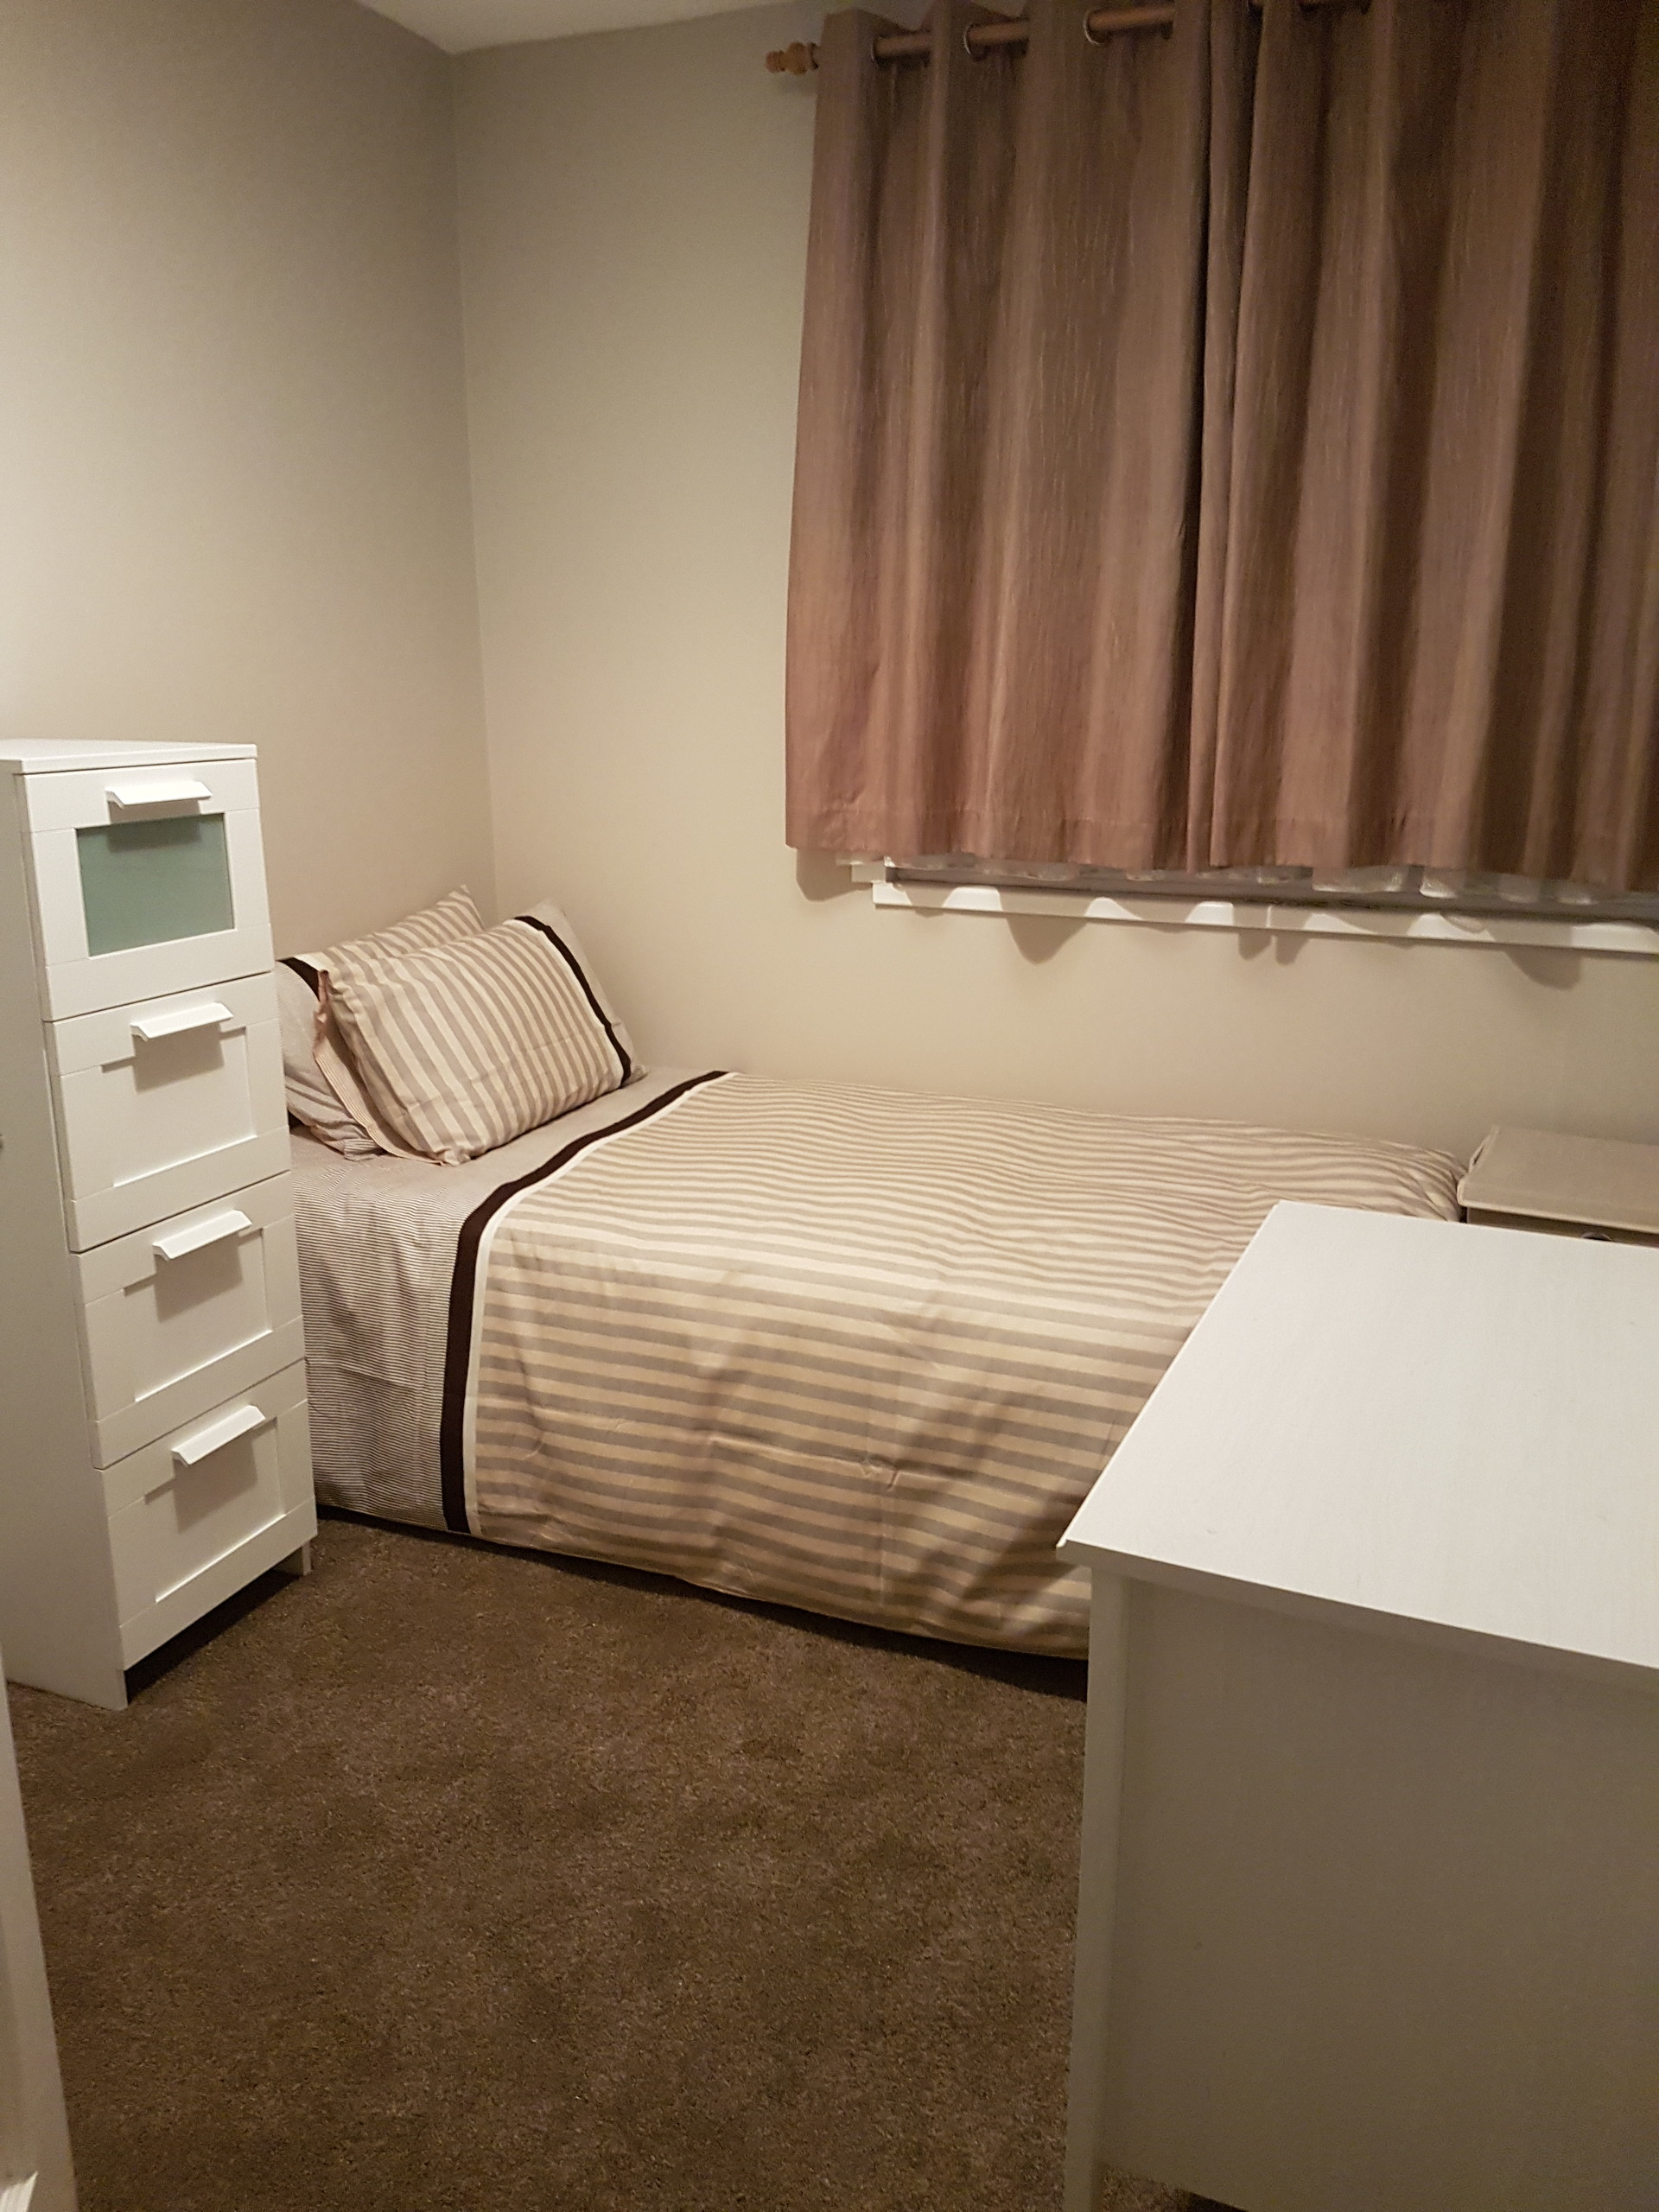 Newly furnished single bedroom. Room for rent Tallaght